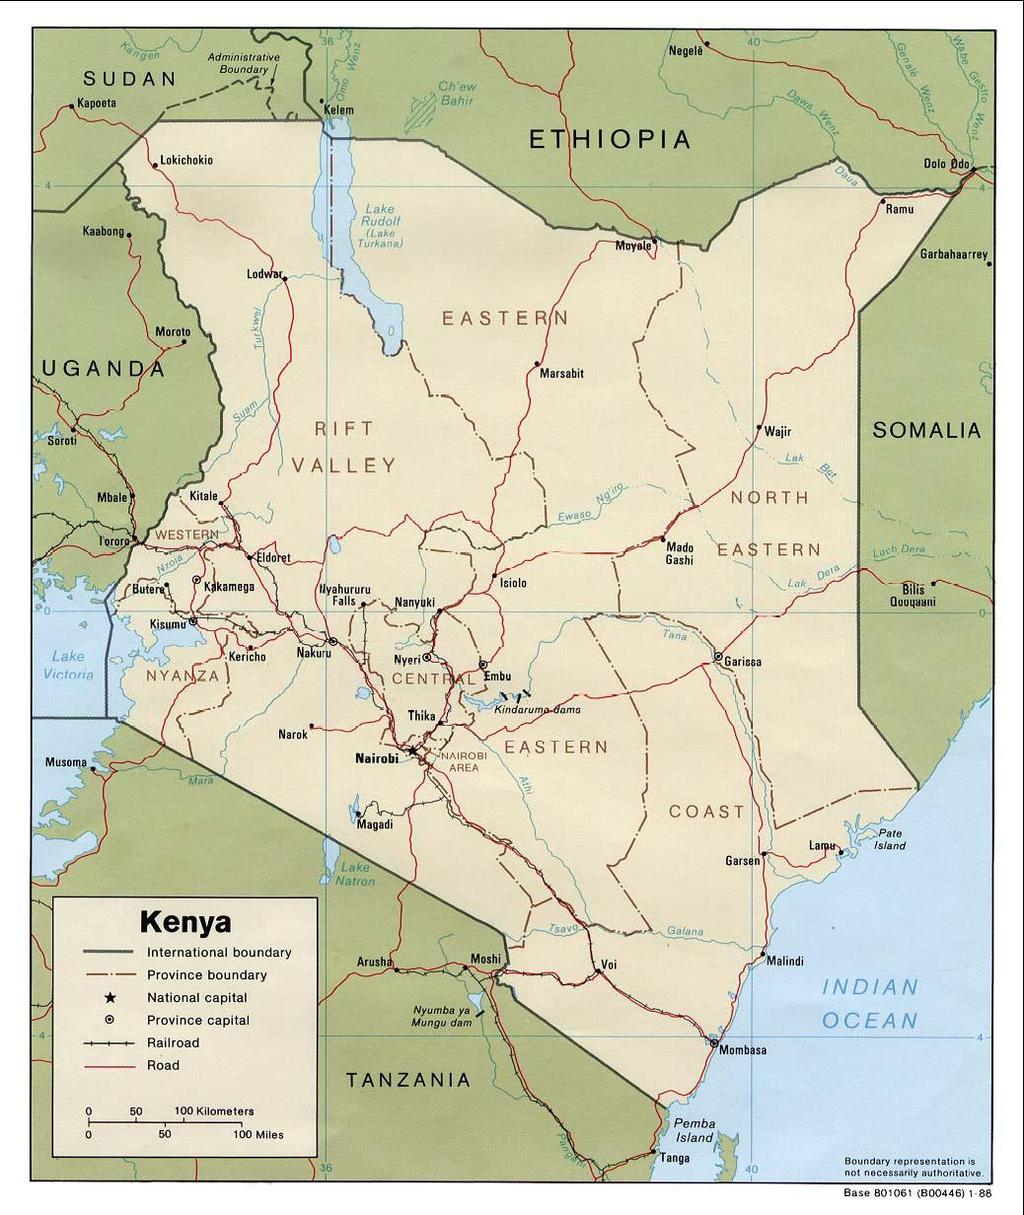 - 38 - Map 1: EPZs with apparel firms (2005) Nairobi: various EPZs, 6 firms (some multiplant) Athi River: 1 EPZ, 7 firms Voi: 1 EPZ,